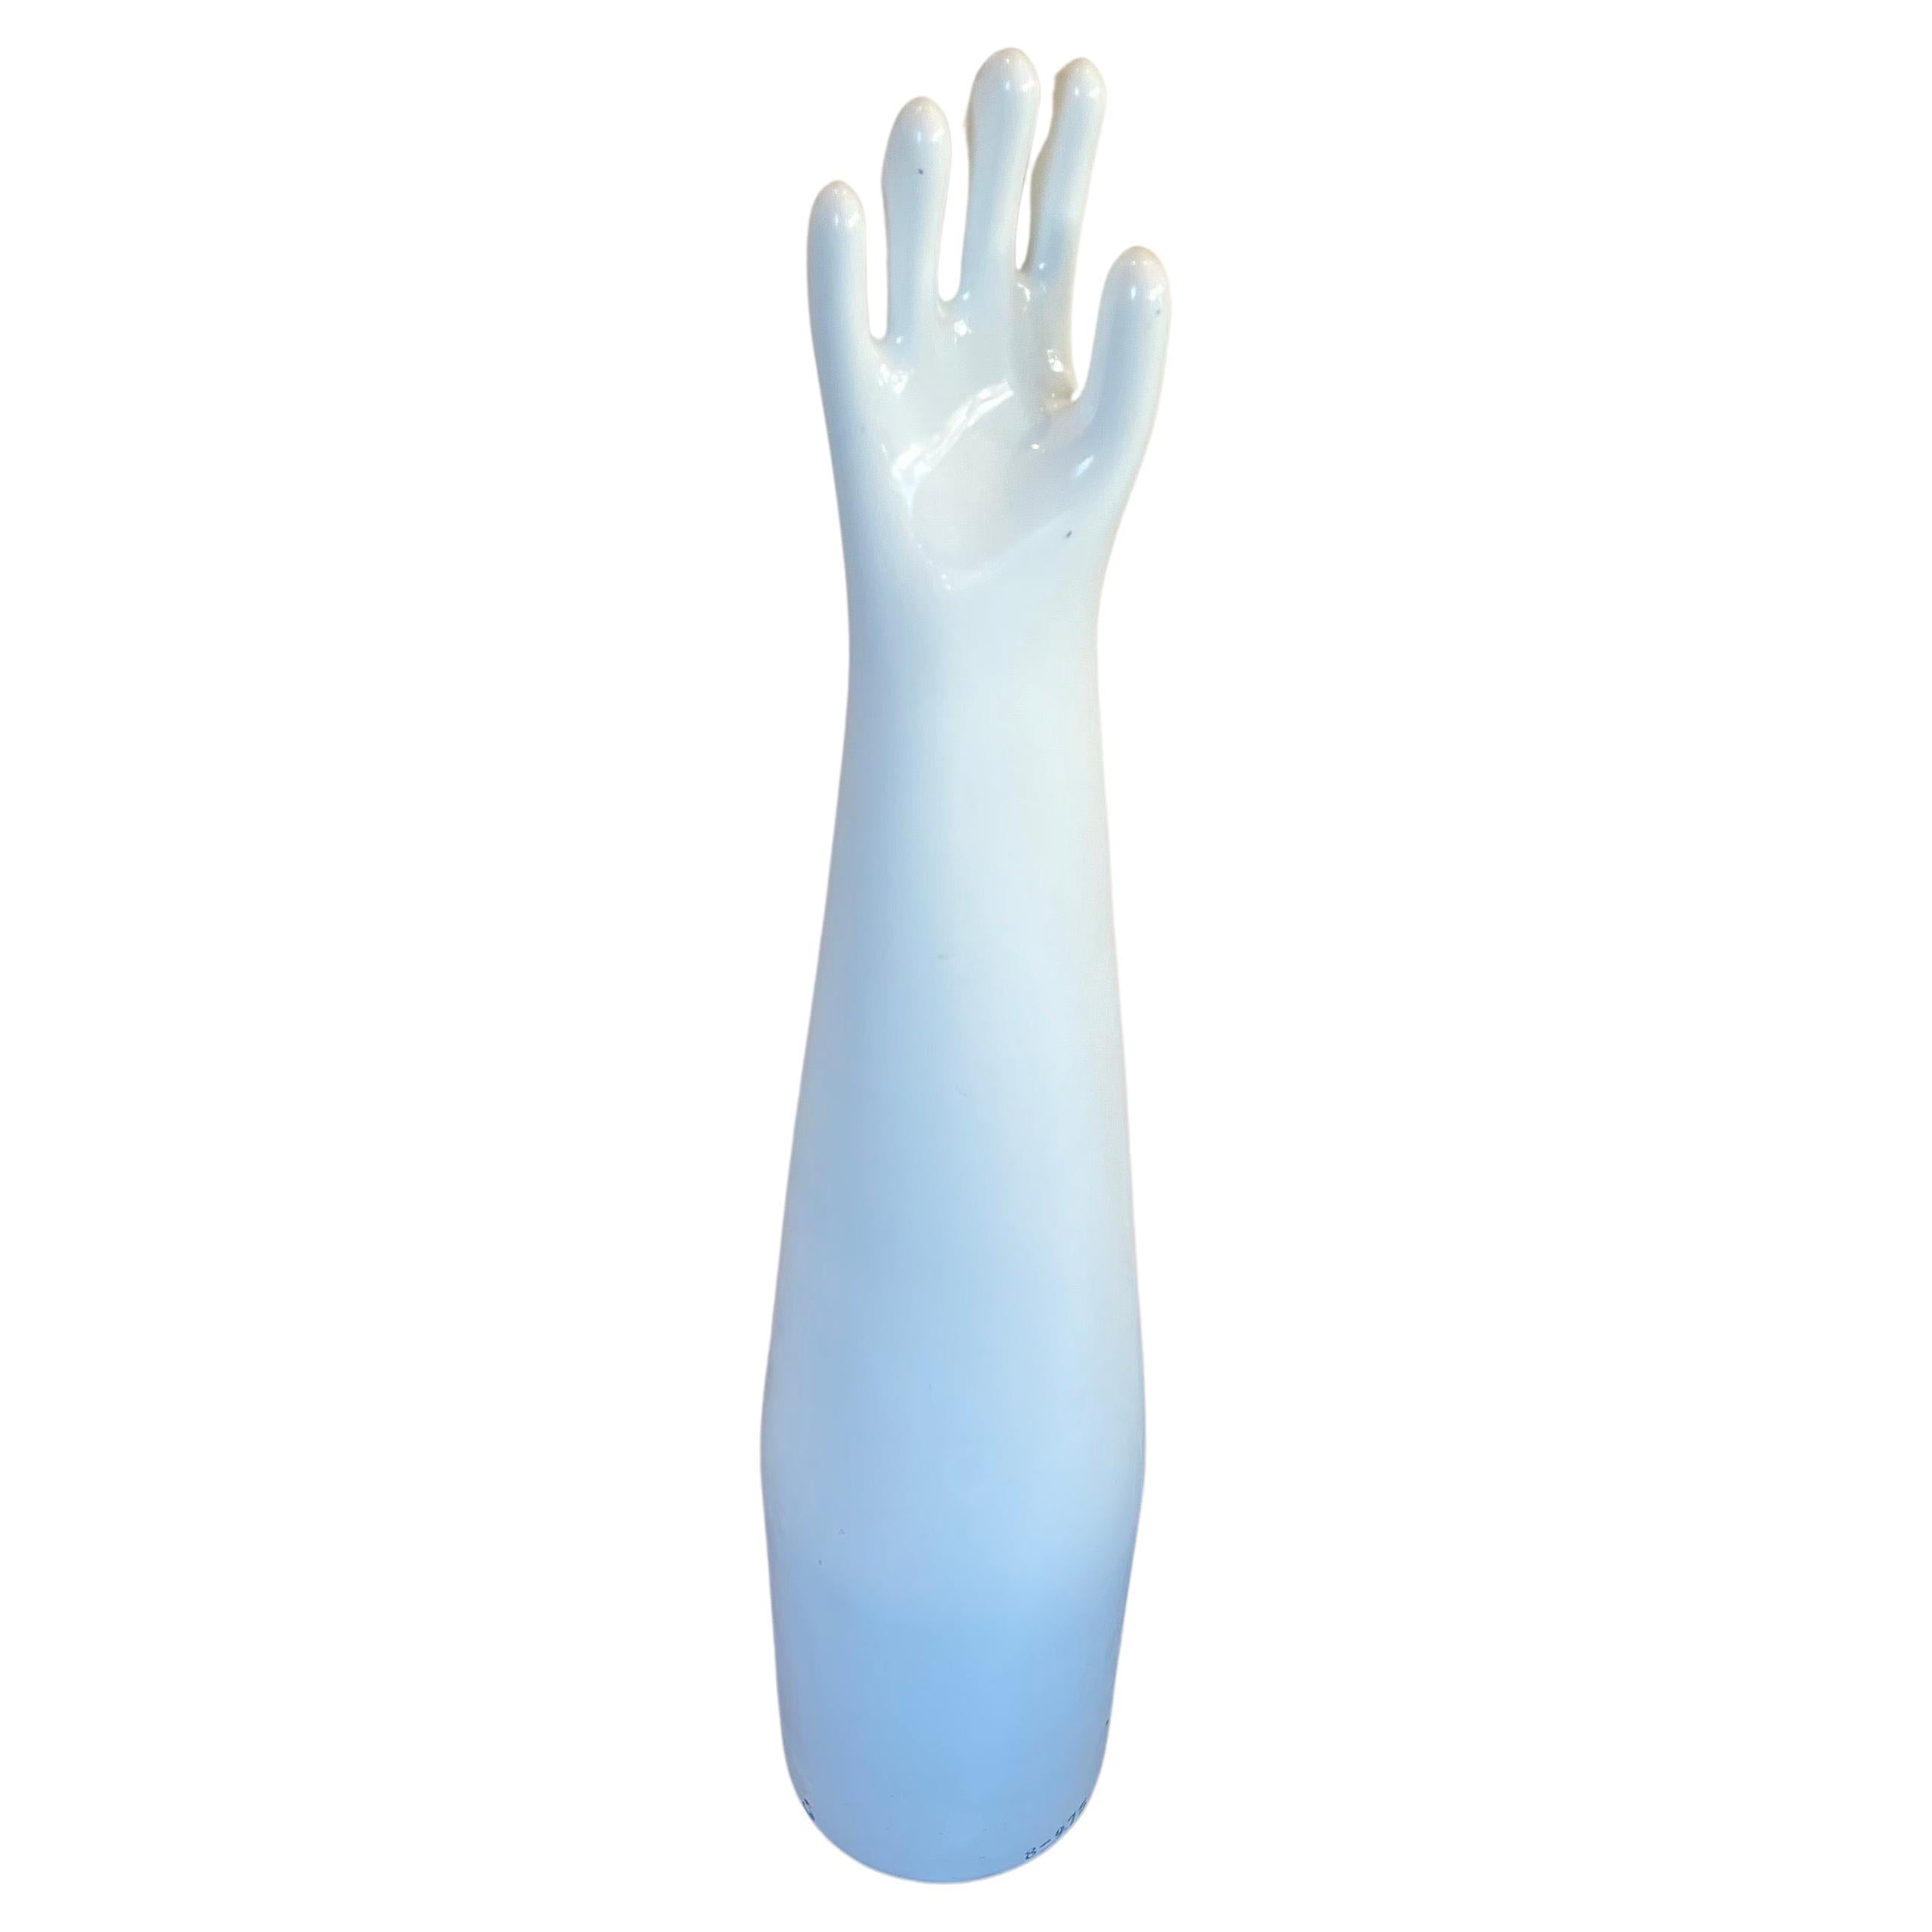 Massive Industrial Ceramic Glove Mold by Shinko of Japan For Sale